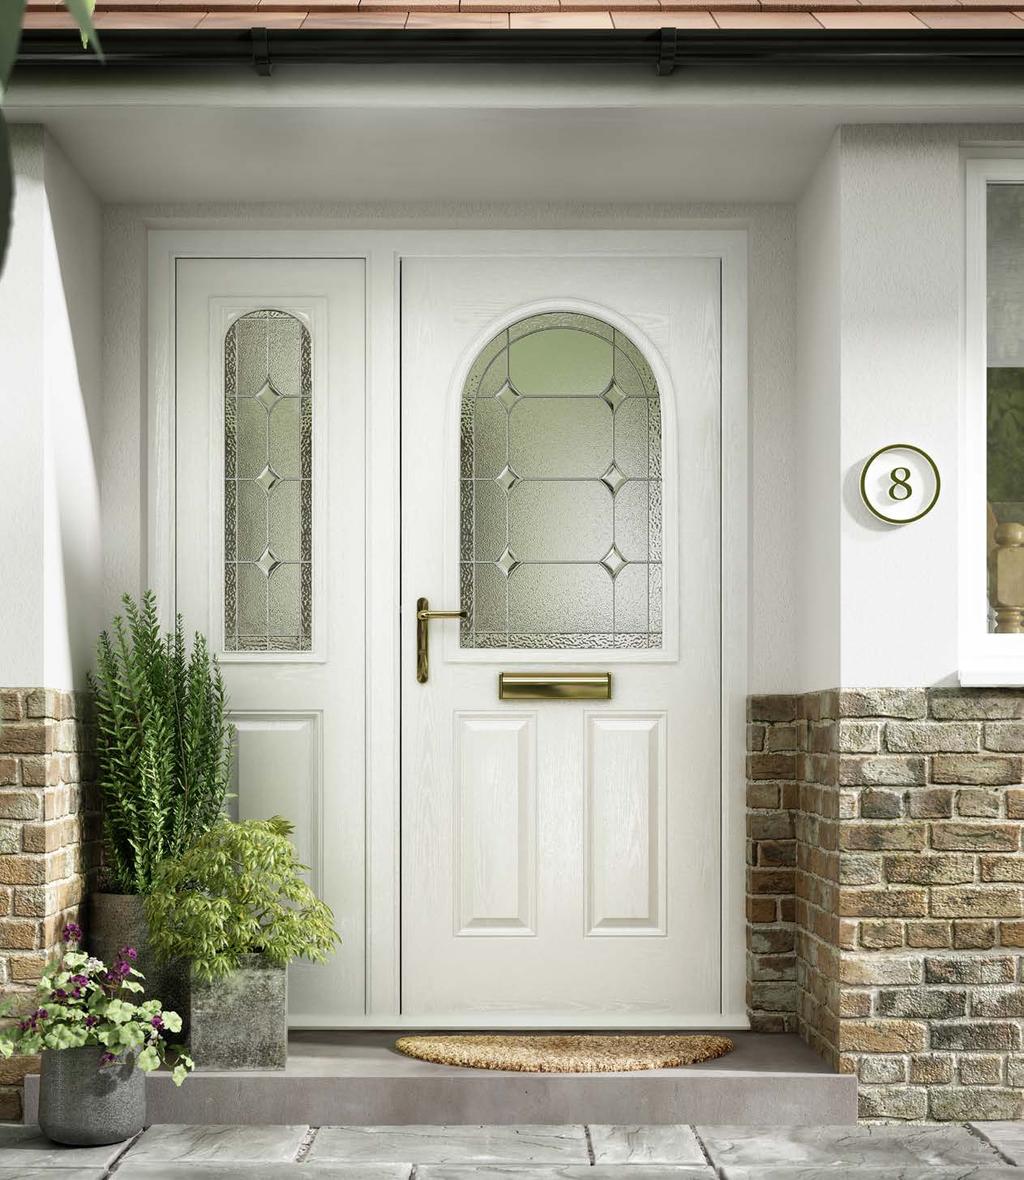 Sidelights When you need more than just a door Many doors also have side panels that extend the decorative glazing over a